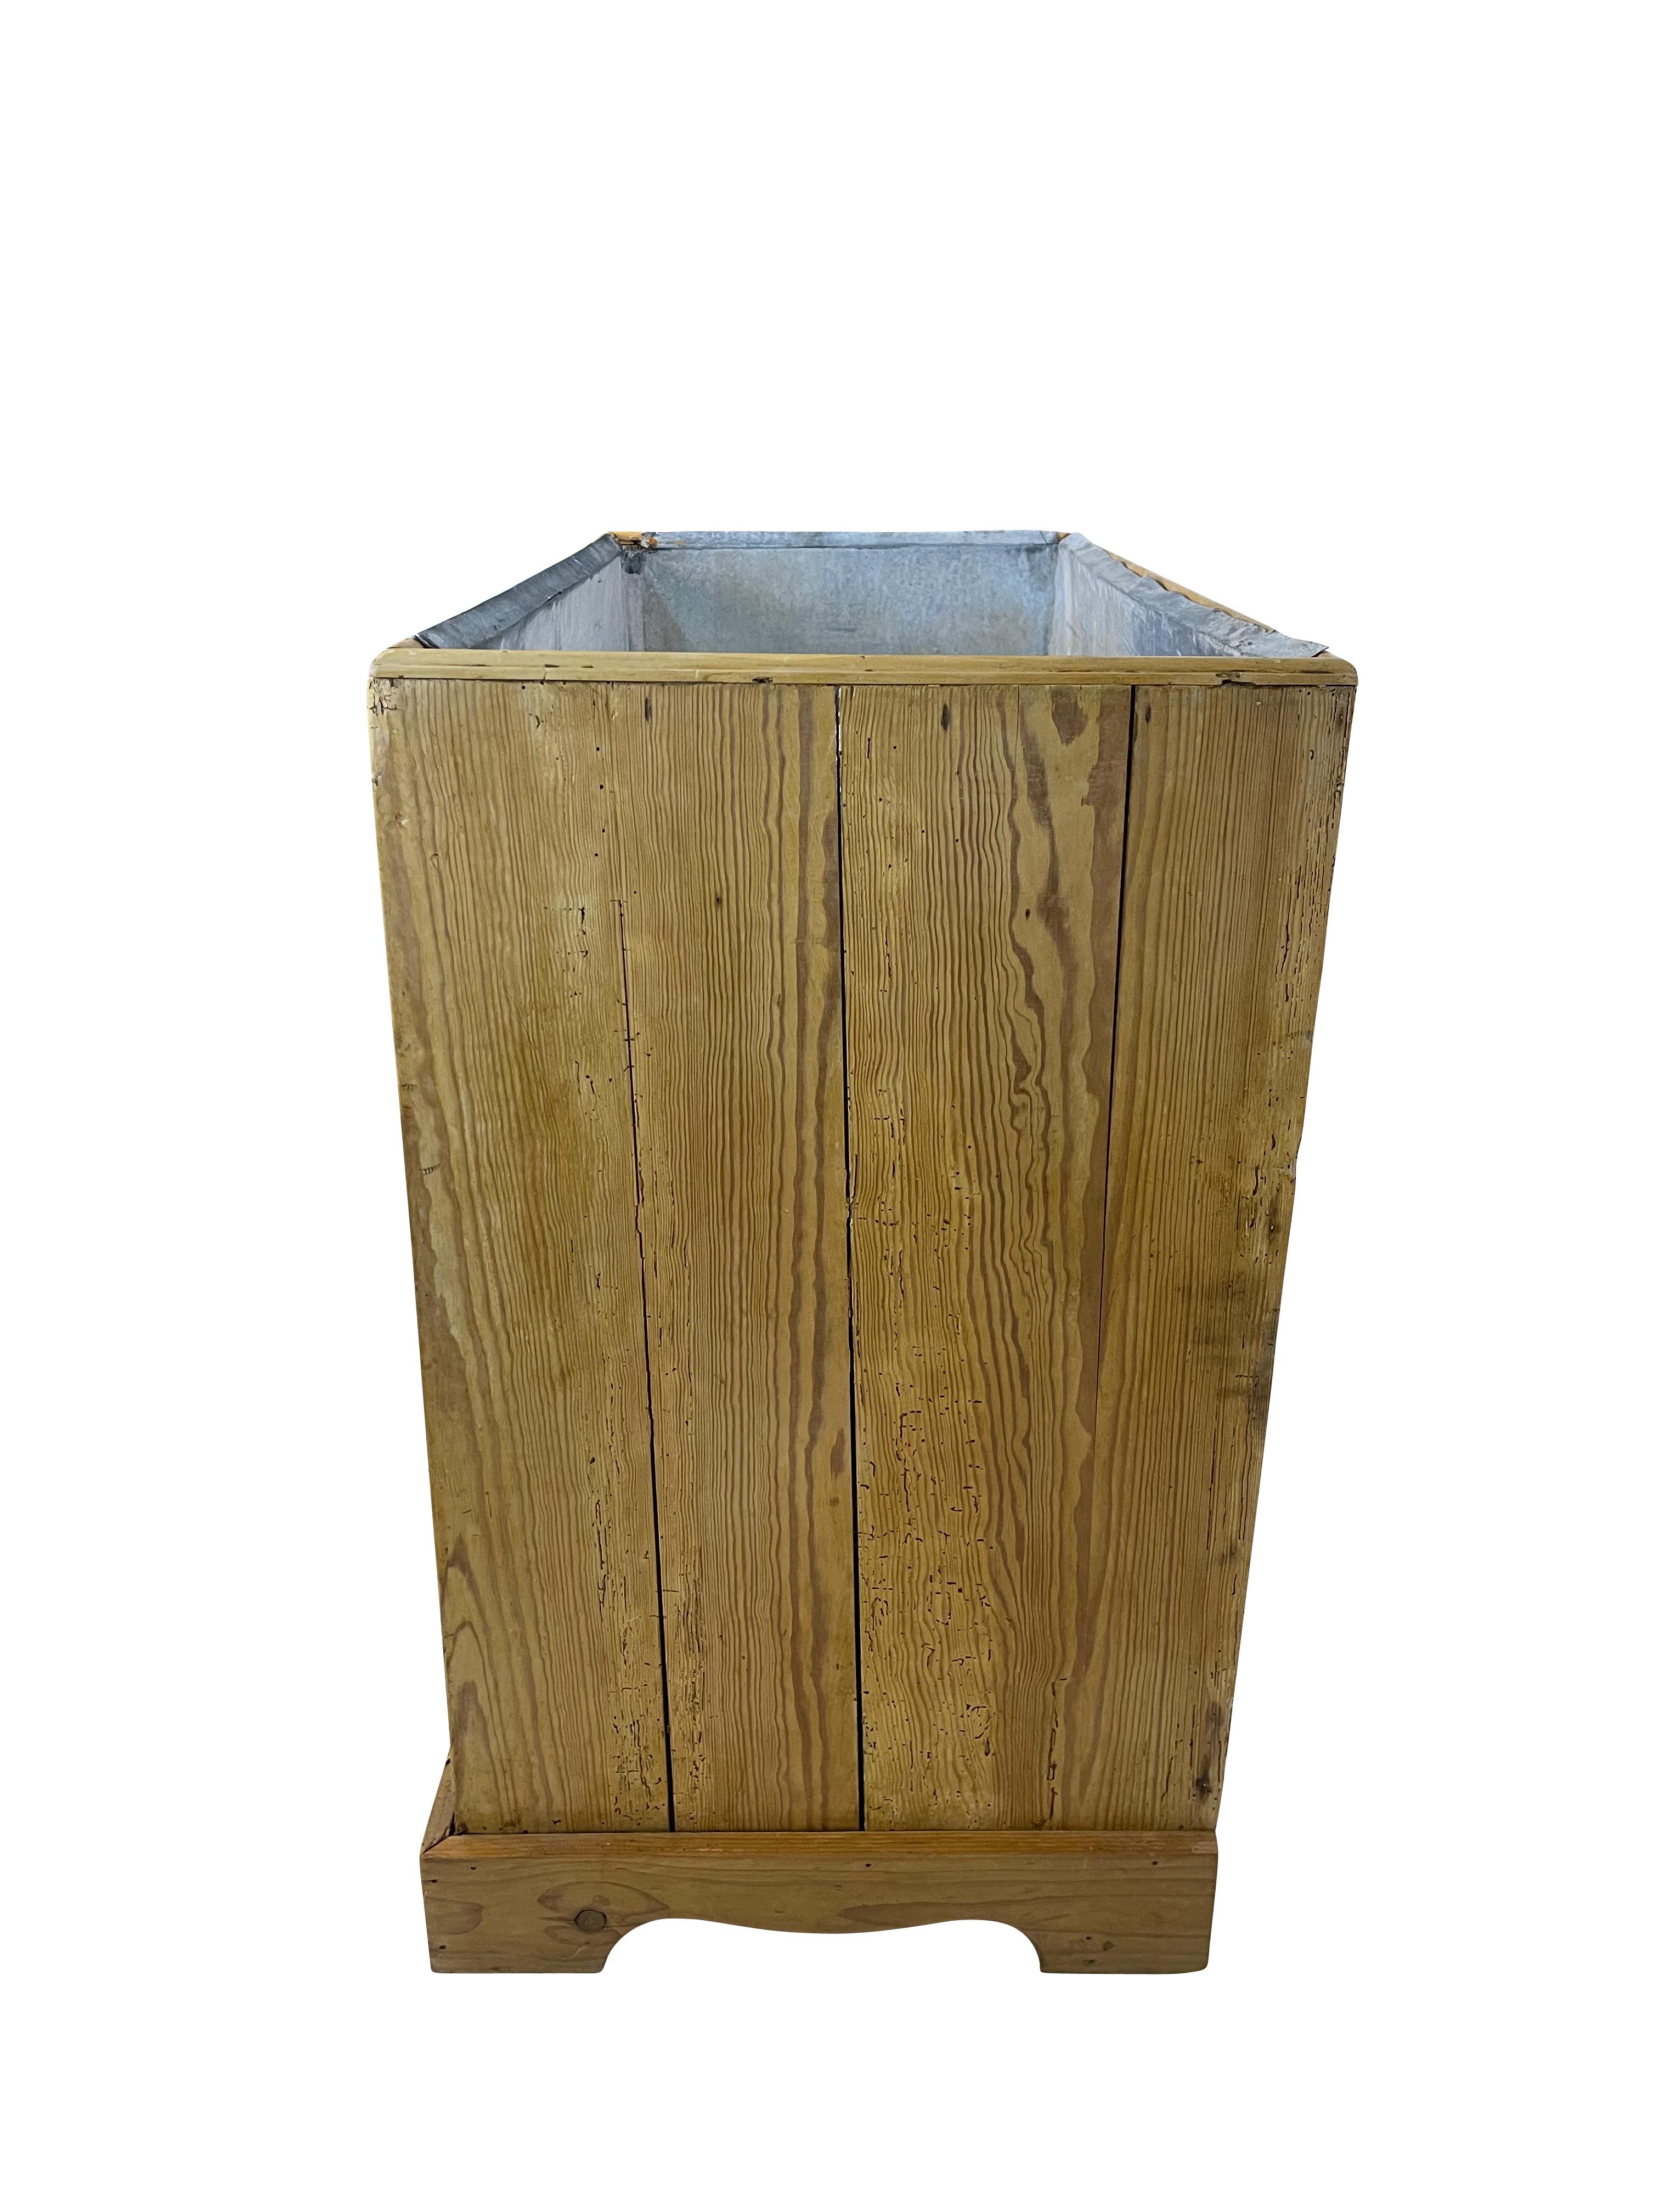 English Pine Dry Sink/ Plant Stand with Zinc Liner 9